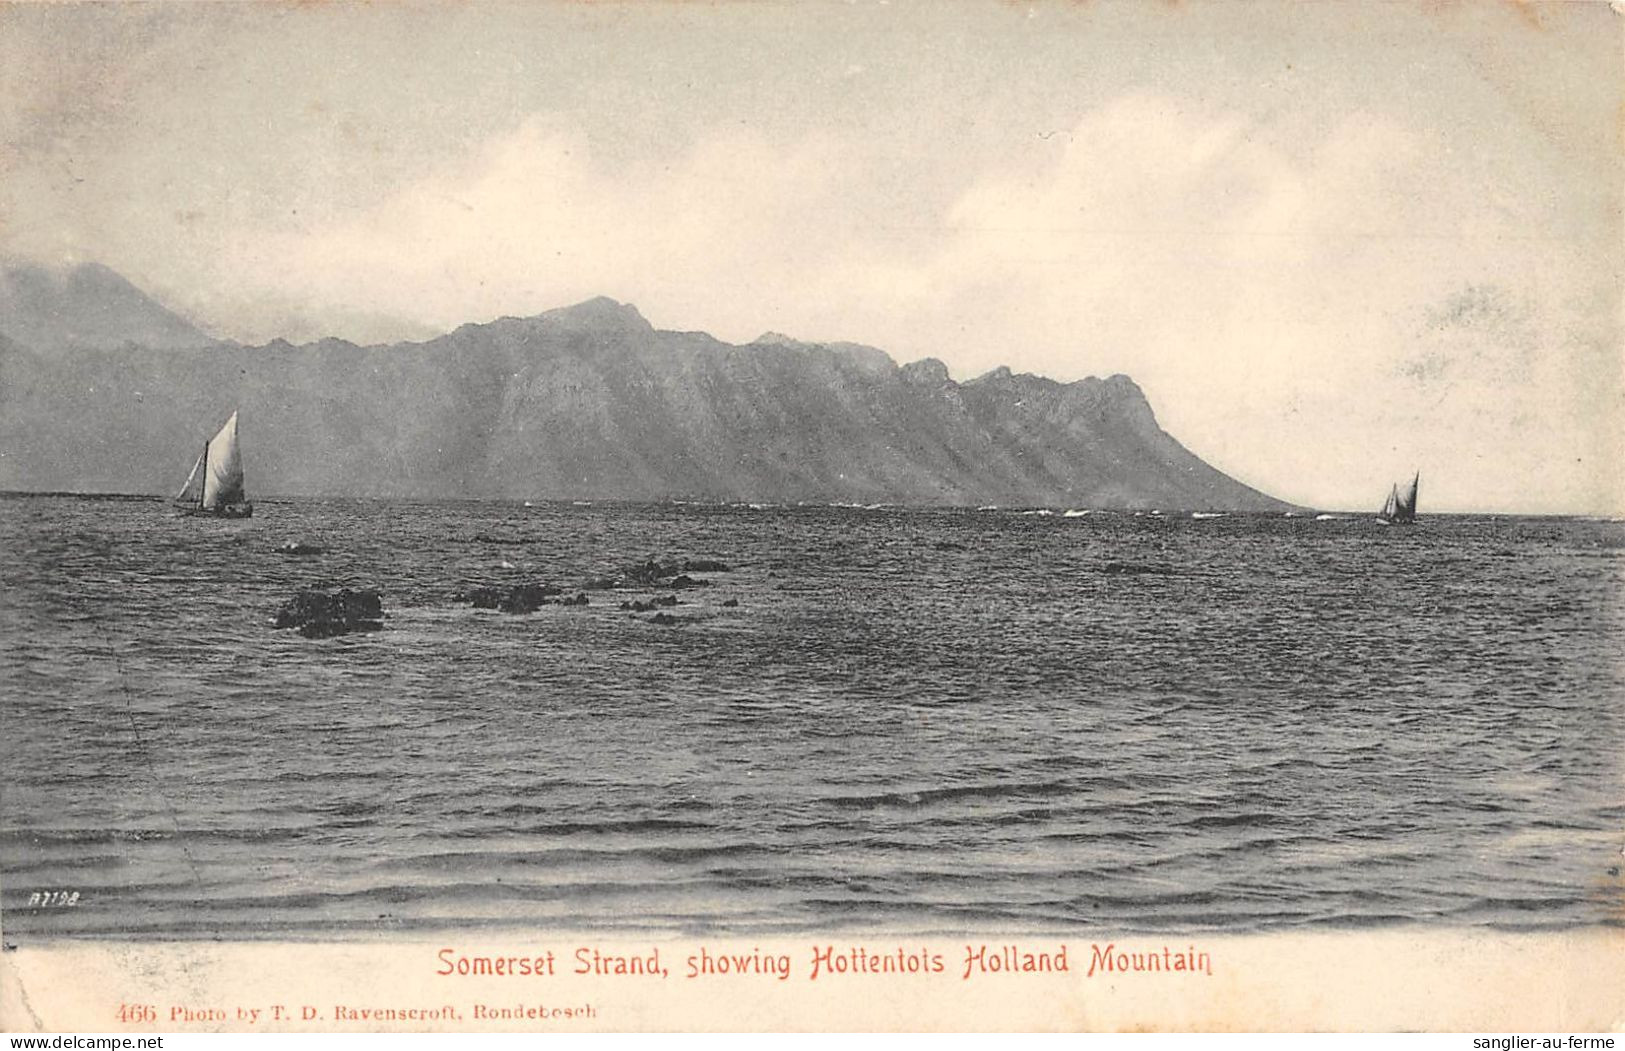 CPA / AFRIQUE DU SUD / SOMERSET STRAND / SHOWING HOTTENTOS / HOLLAND MOUNTAINS - Sudáfrica